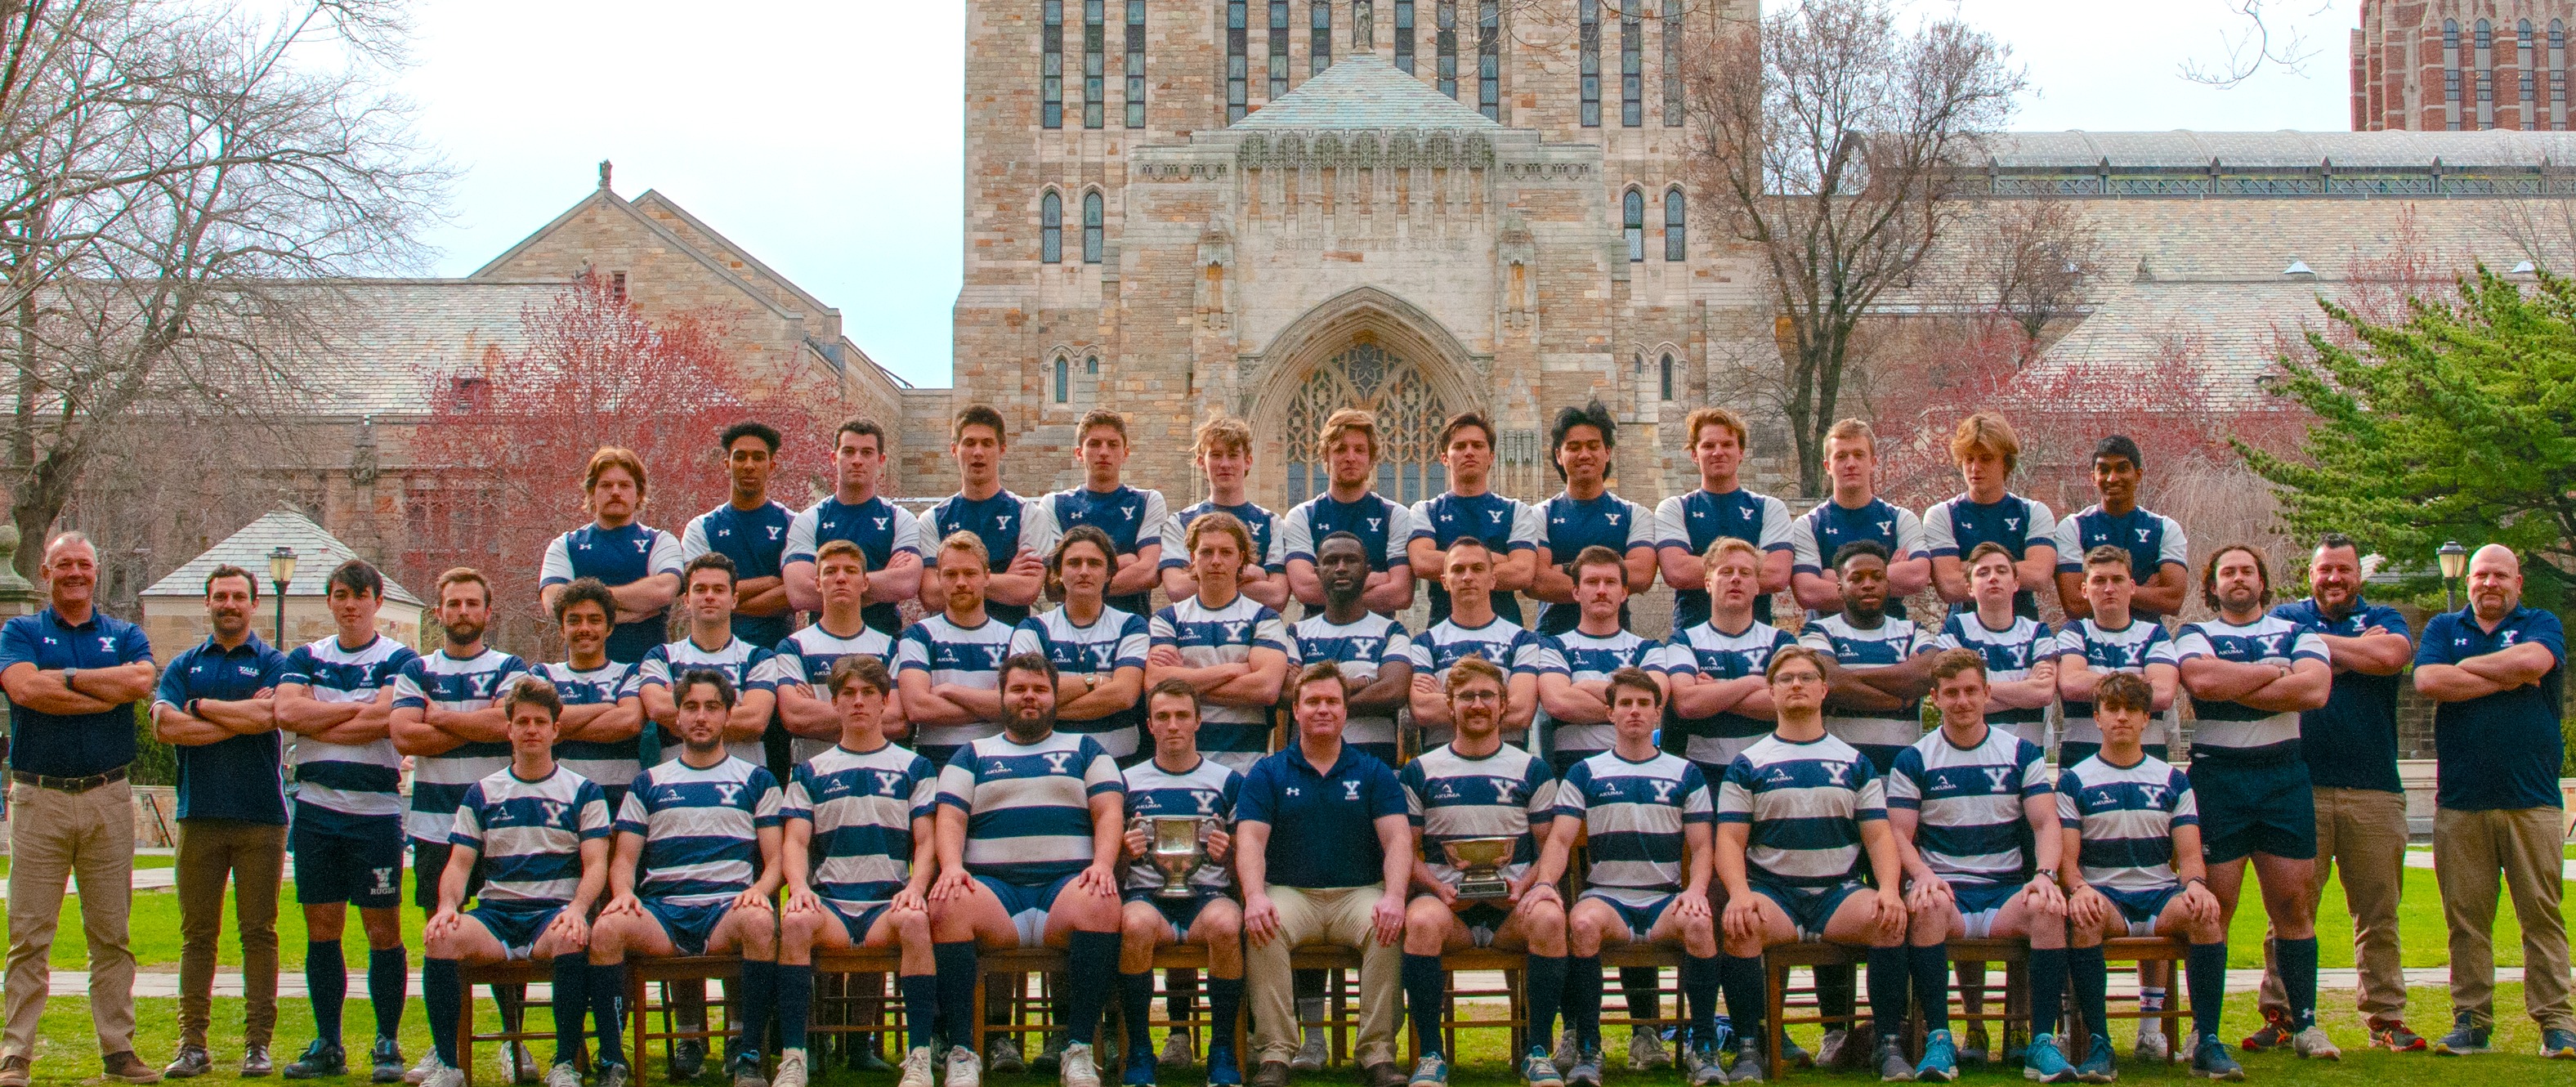 Collegiate Rugby Championship Moves to a New City and Weekend - Collegiate Rugby  Championship